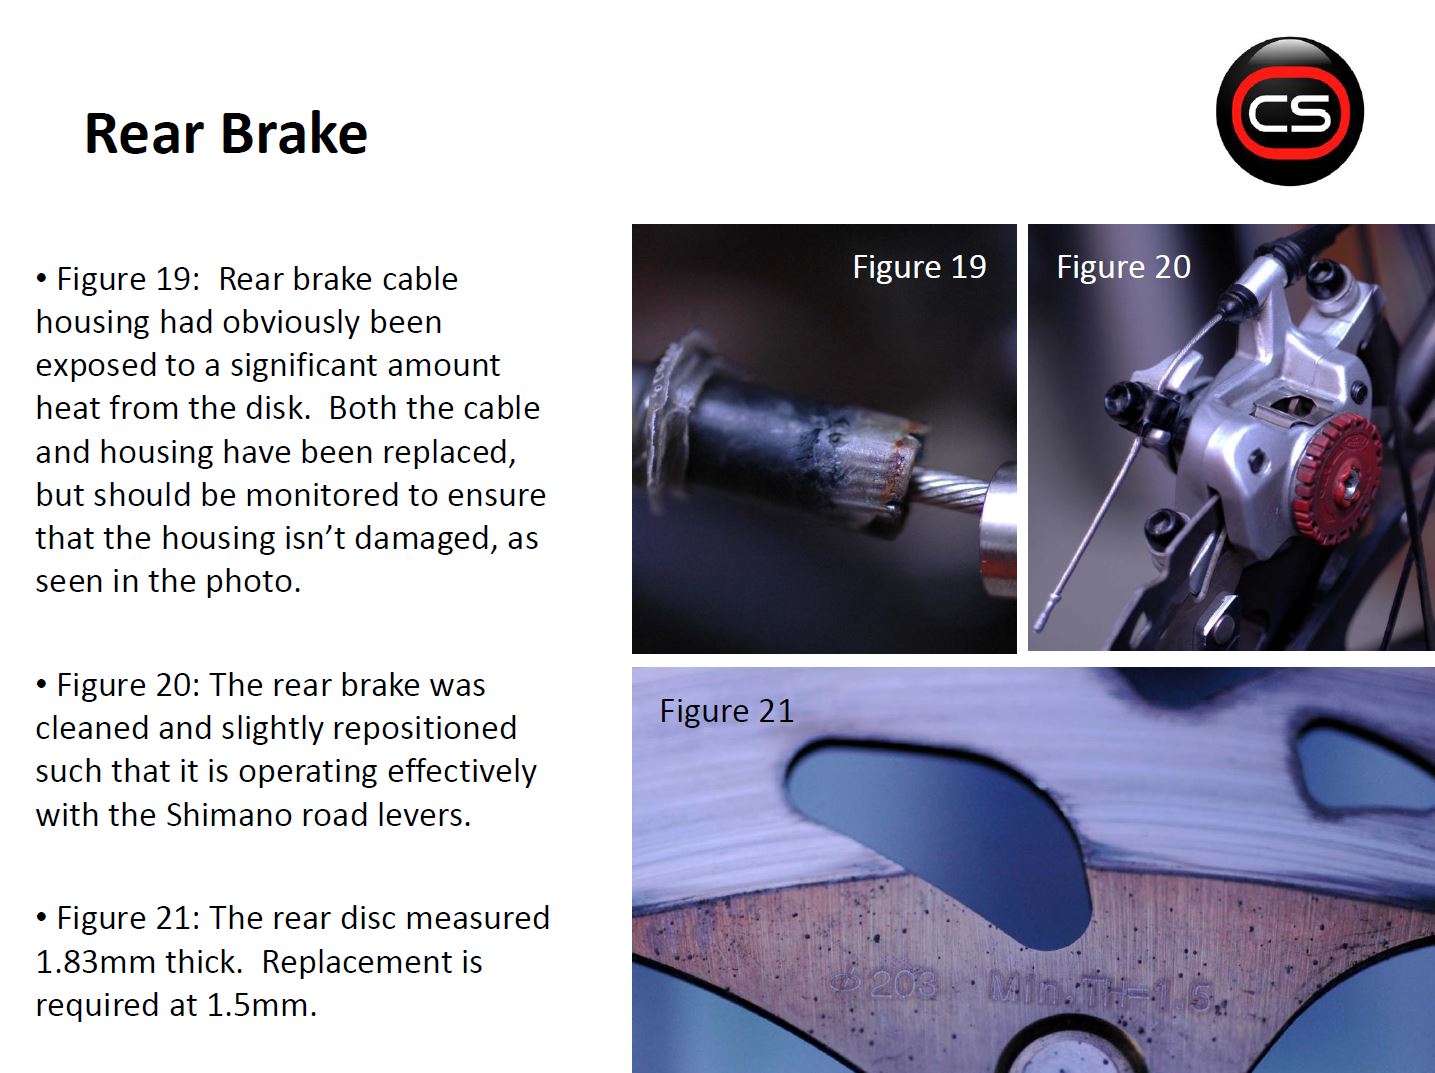 Rear brake cable issues and solutions